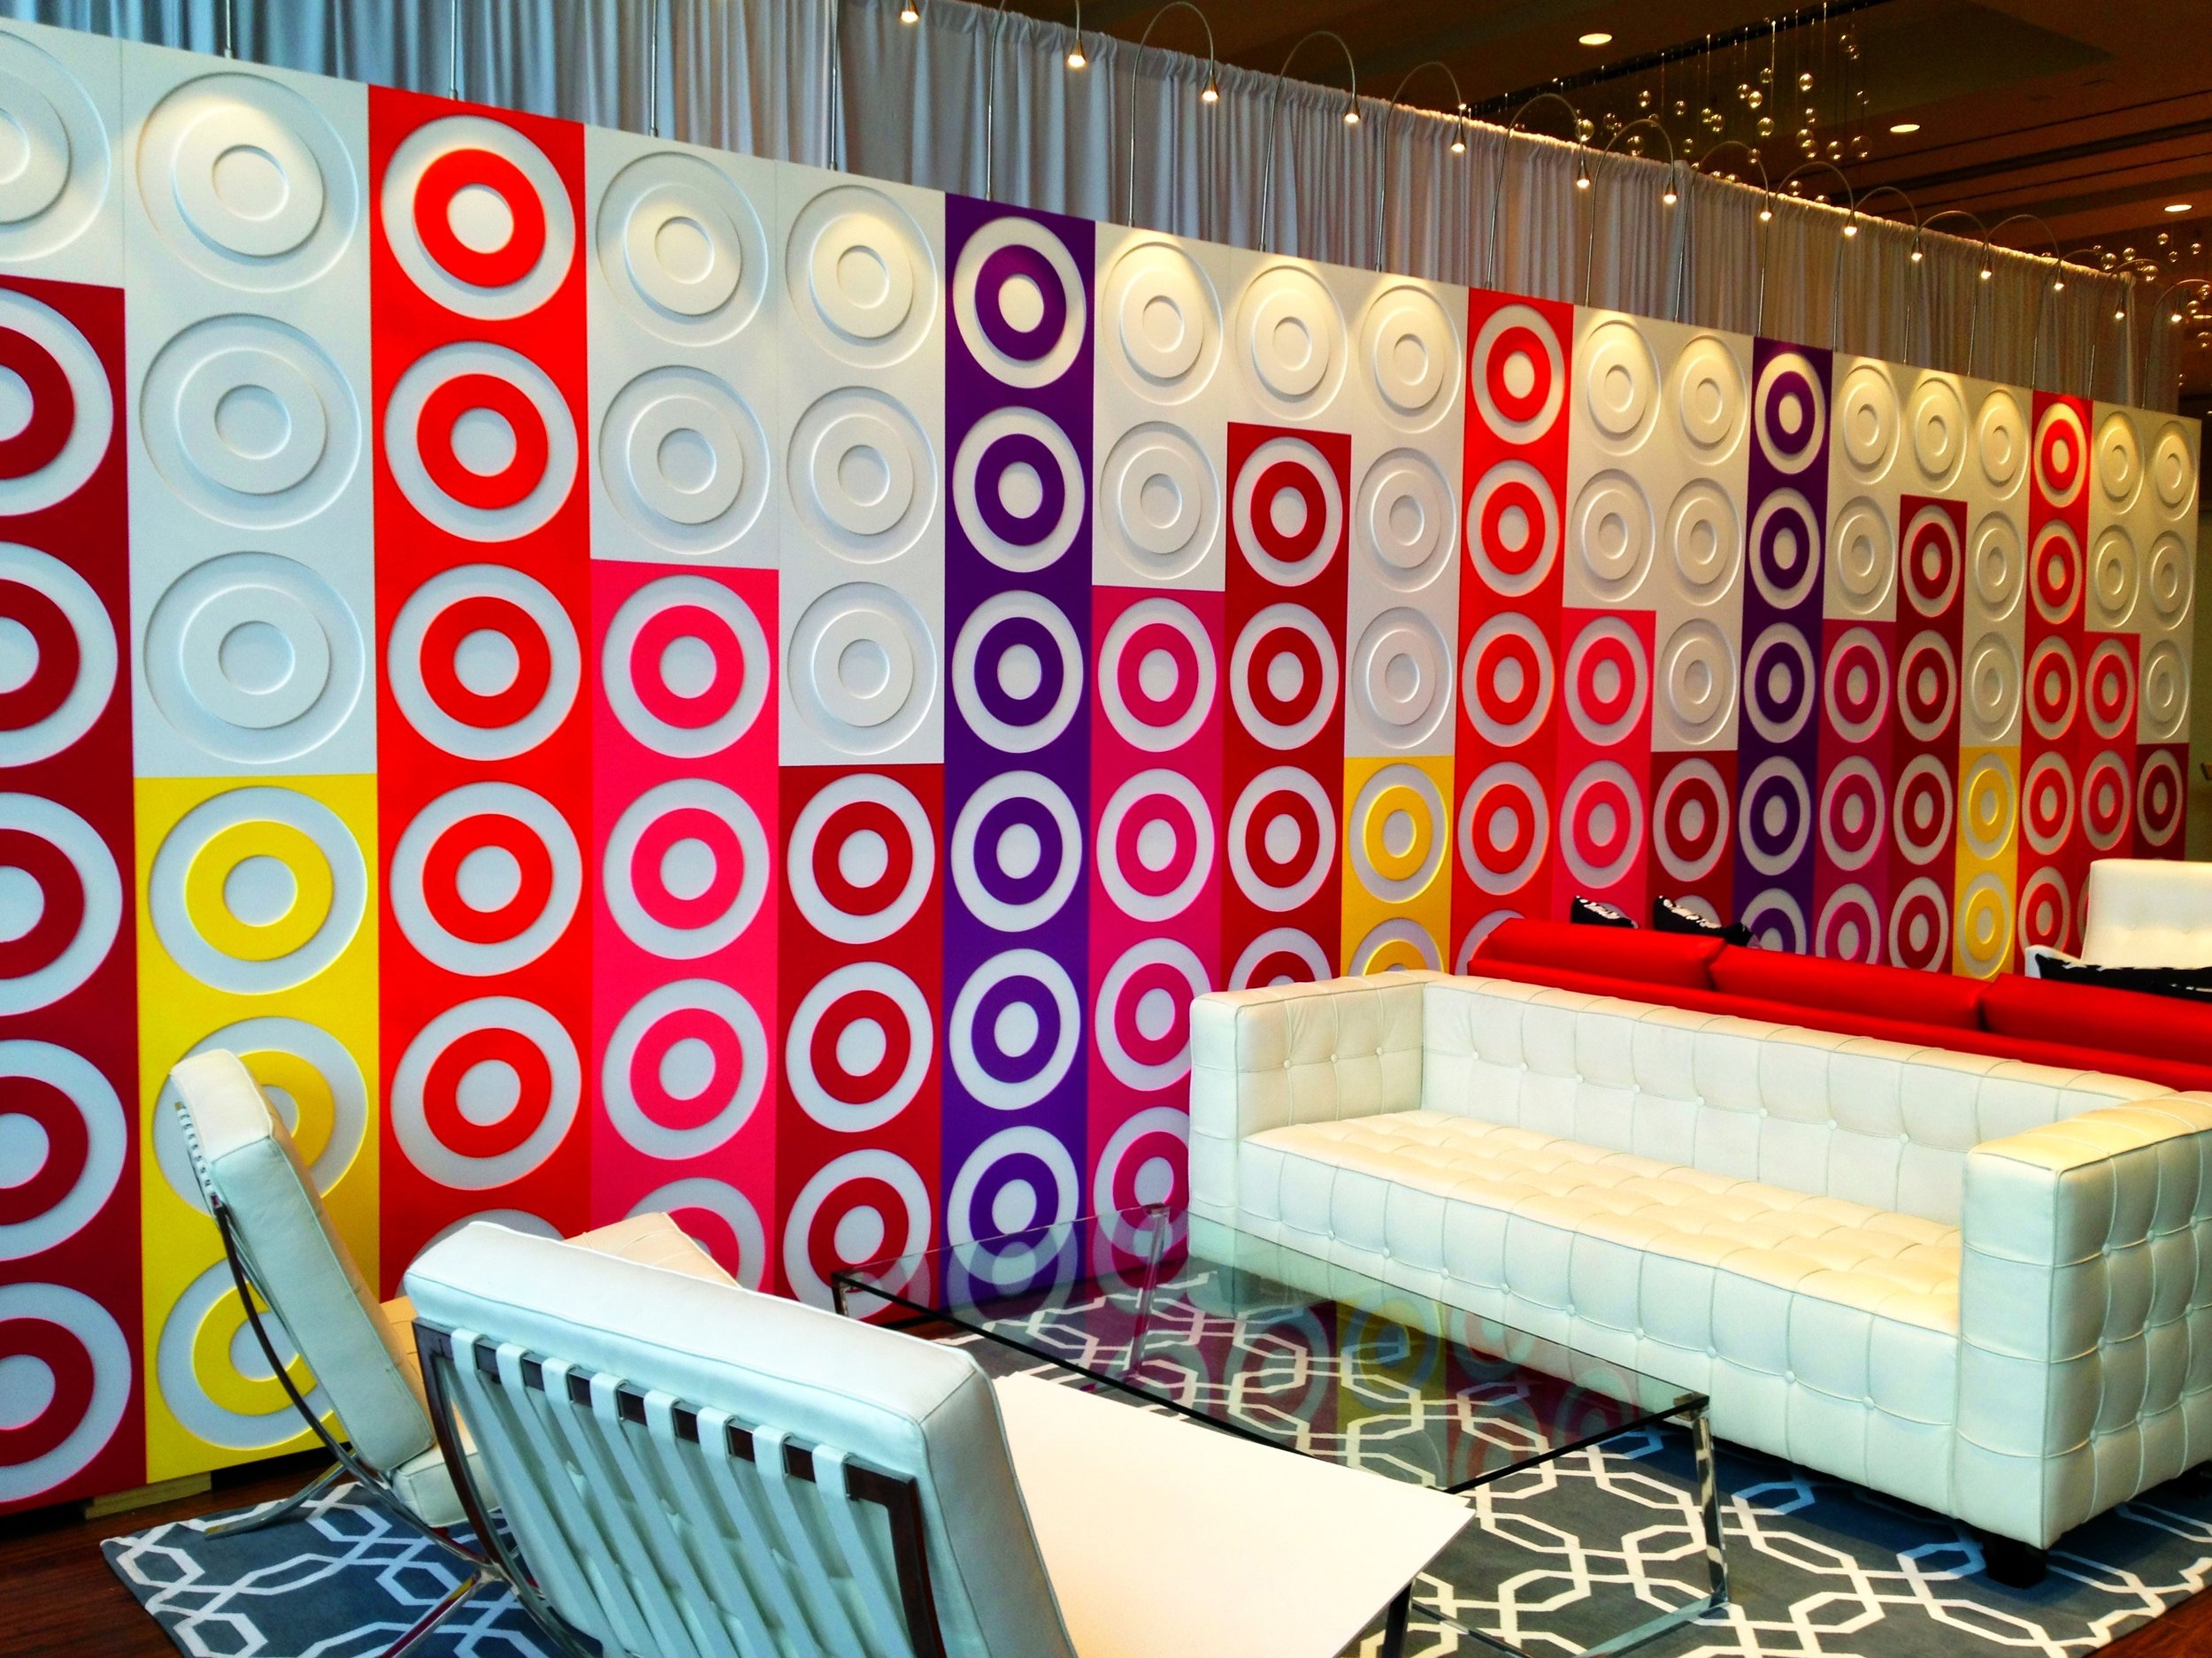 Target lounge with branded wall in bright colors.jpg